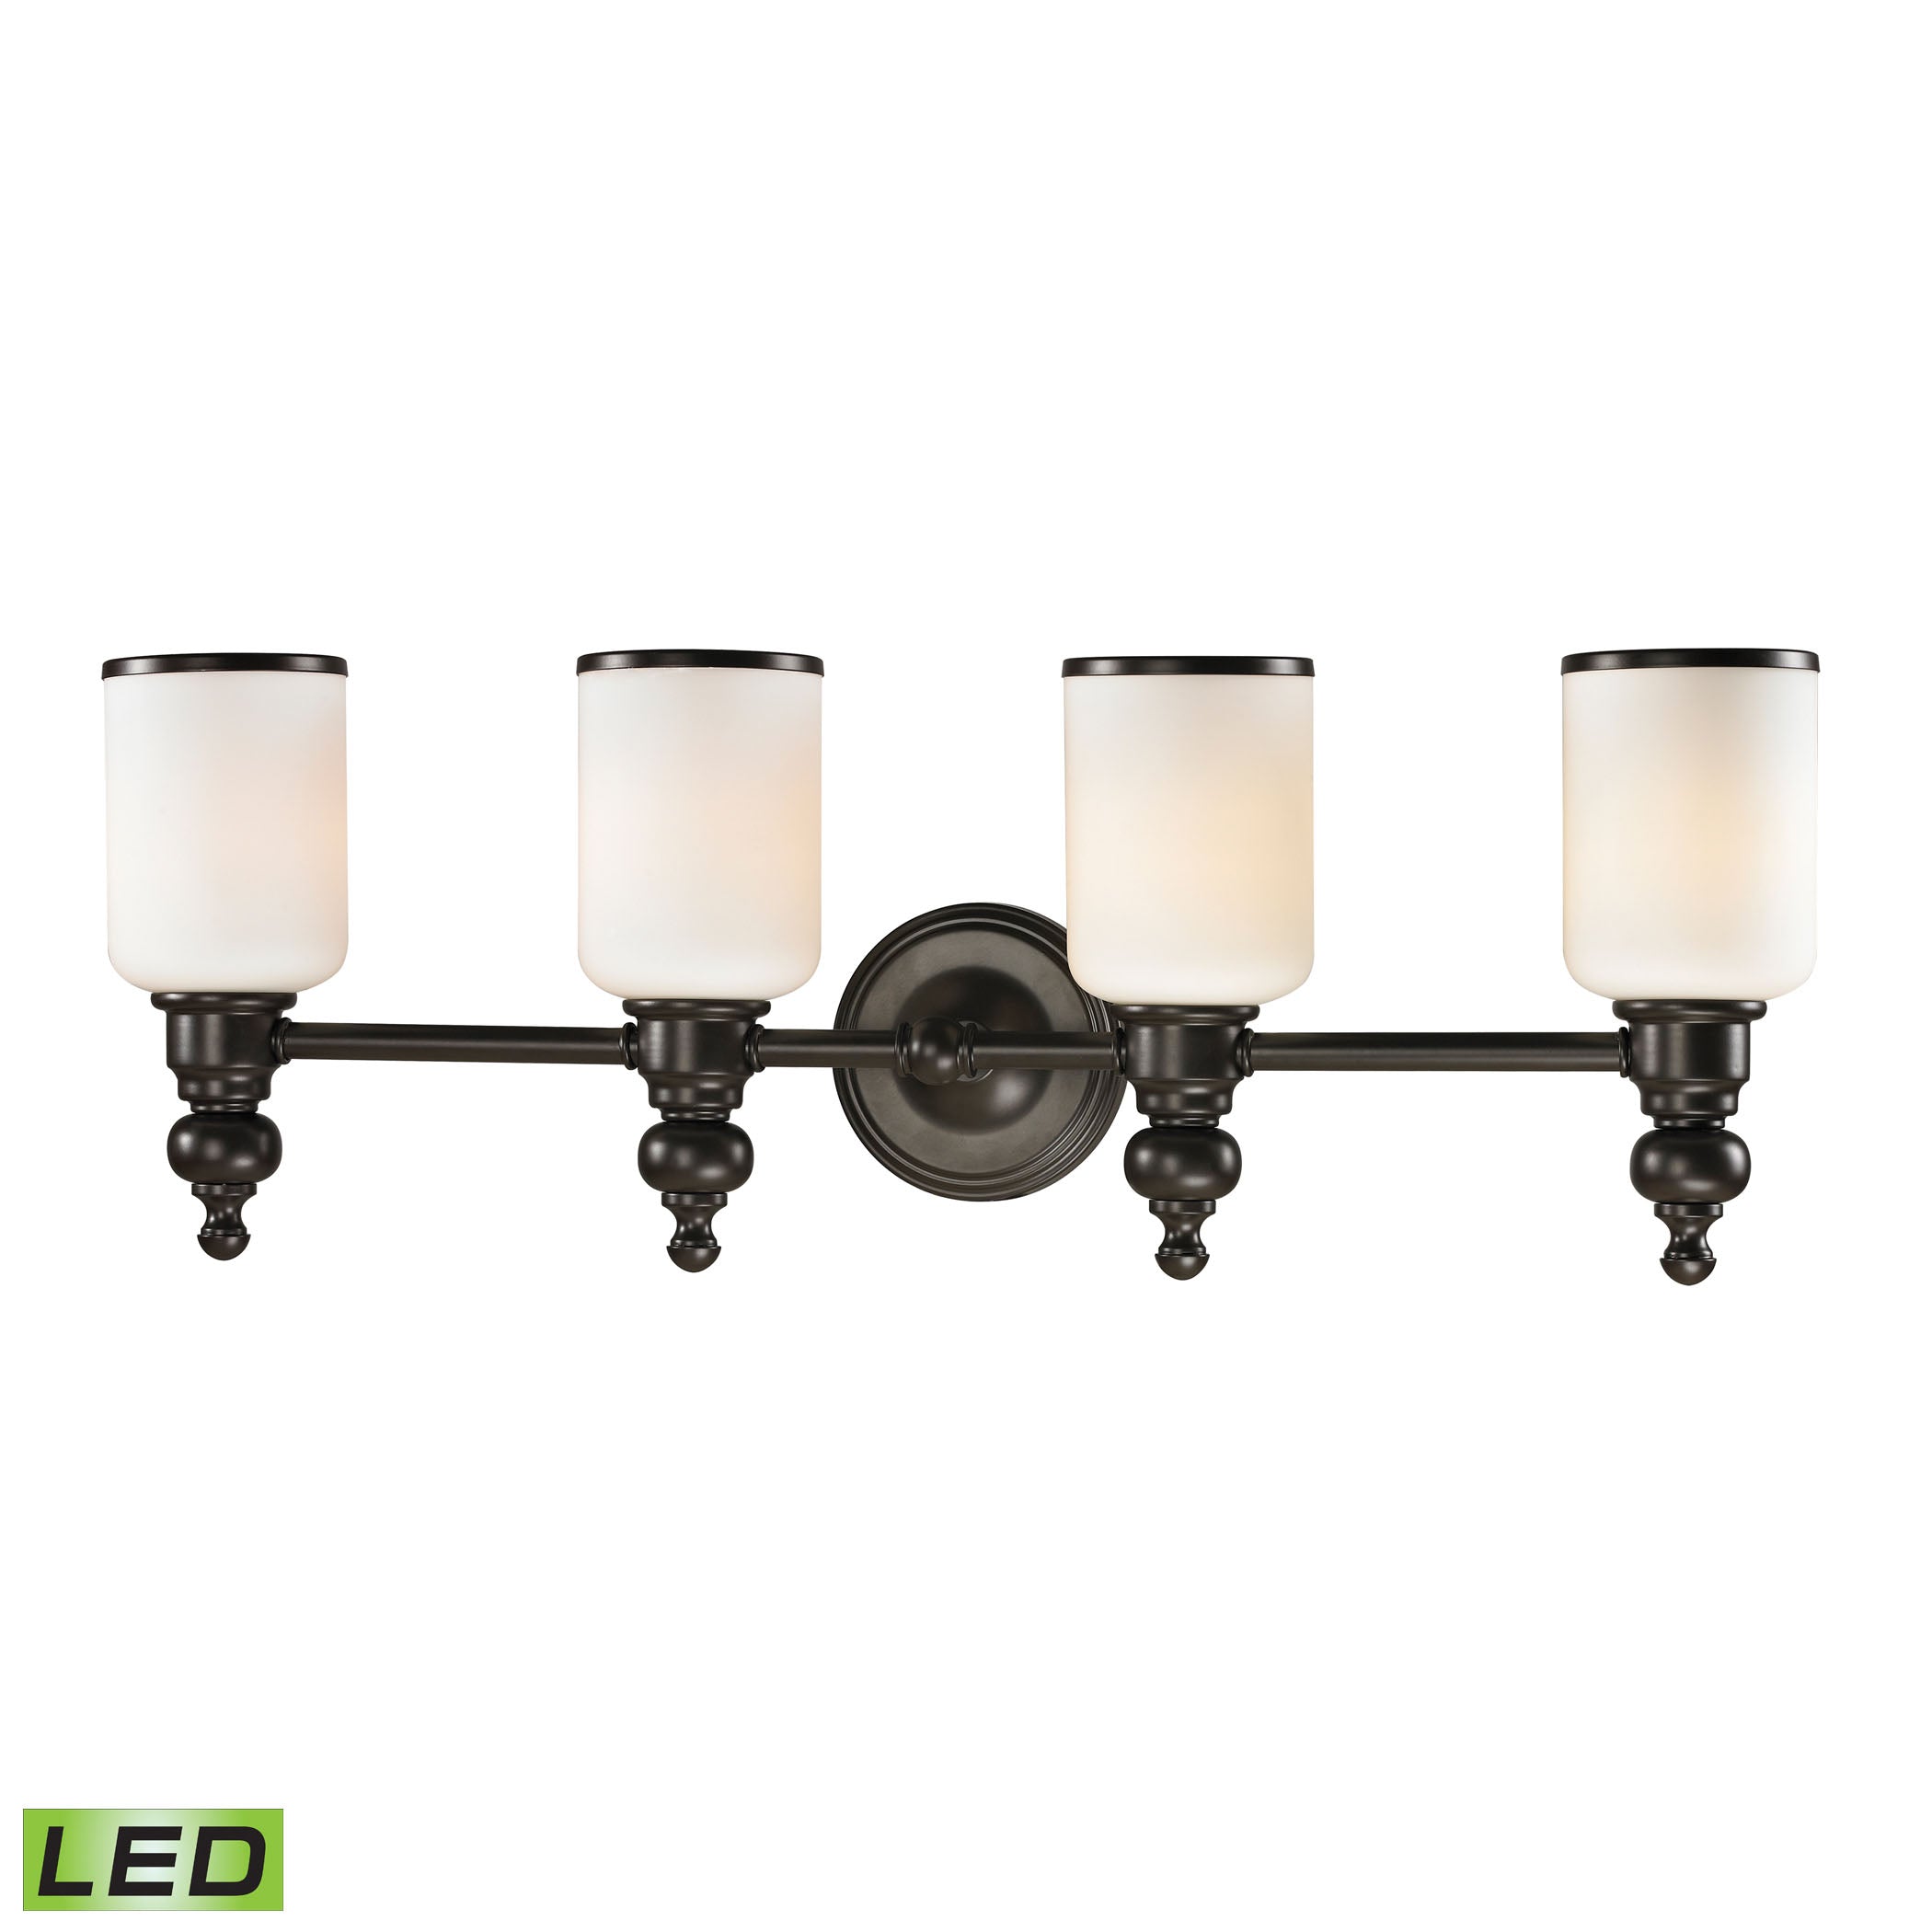 ELK Lighting 11593/4-LED Bristol 4-Light Vanity Lamp in Oil Rubbed Bronze with Opal White Blown Glass - Includes LED Bulbs